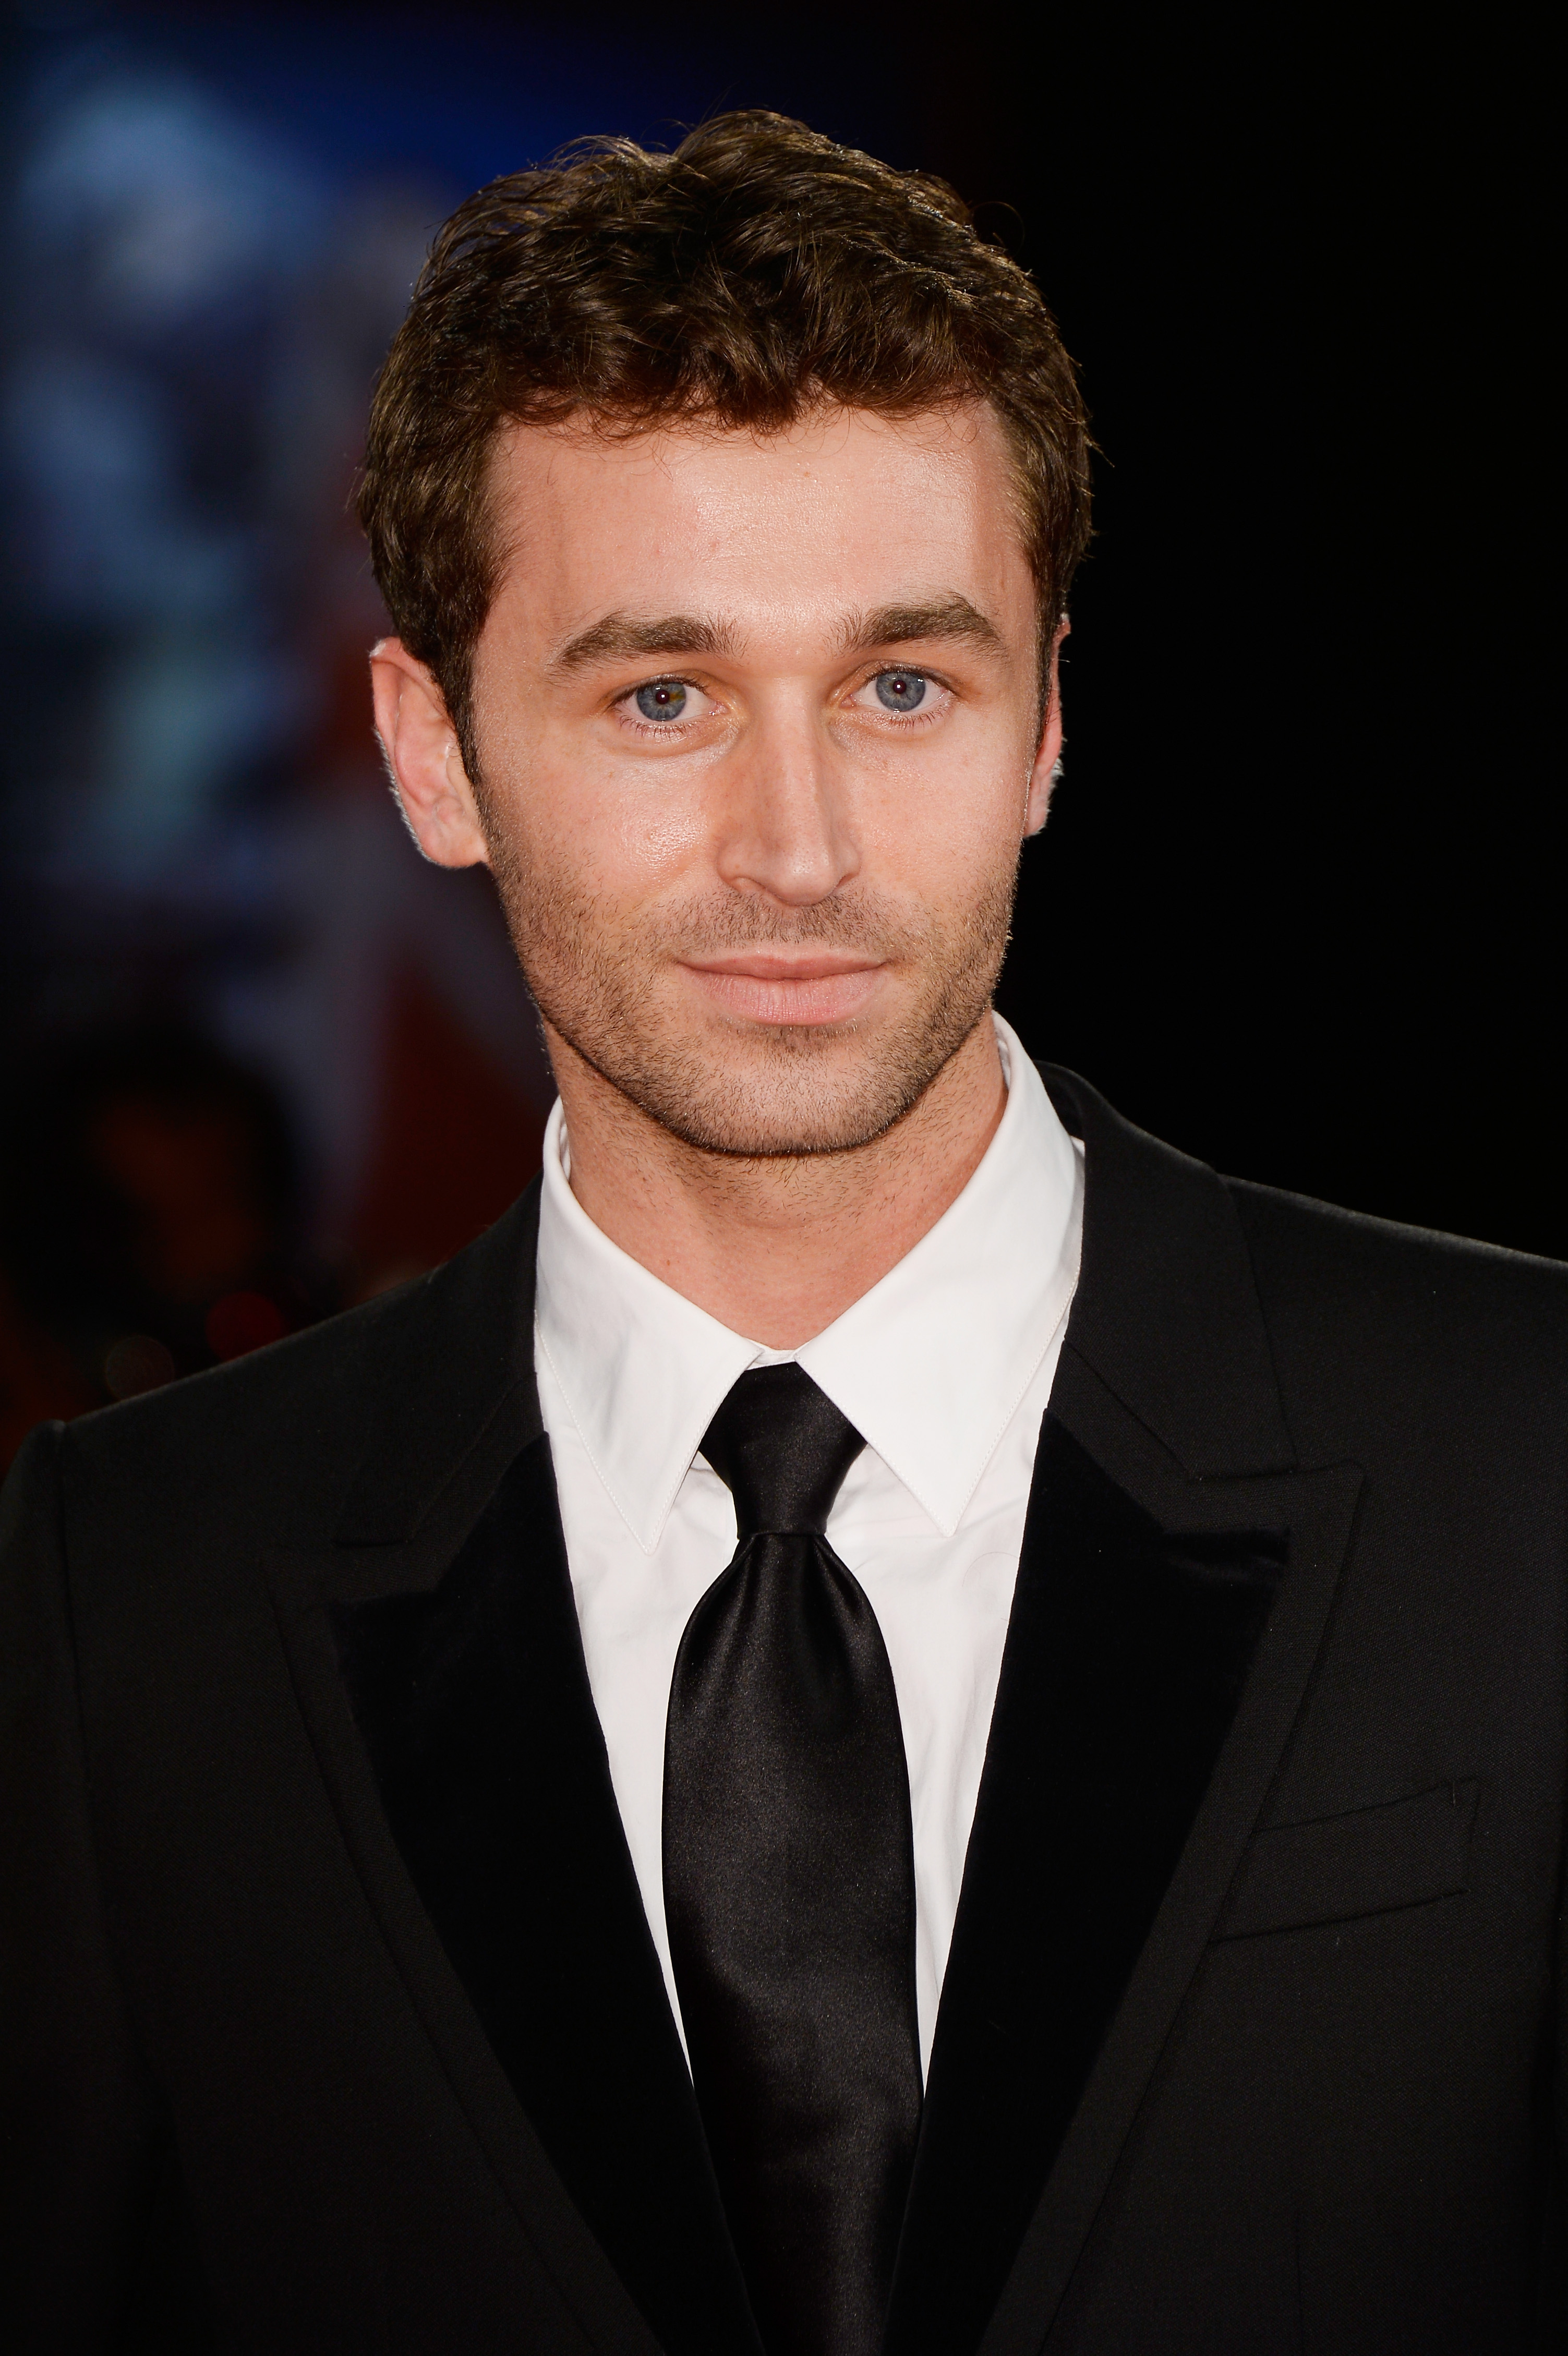 I’m One Of Those Women That Called James Deen A Feminist, An